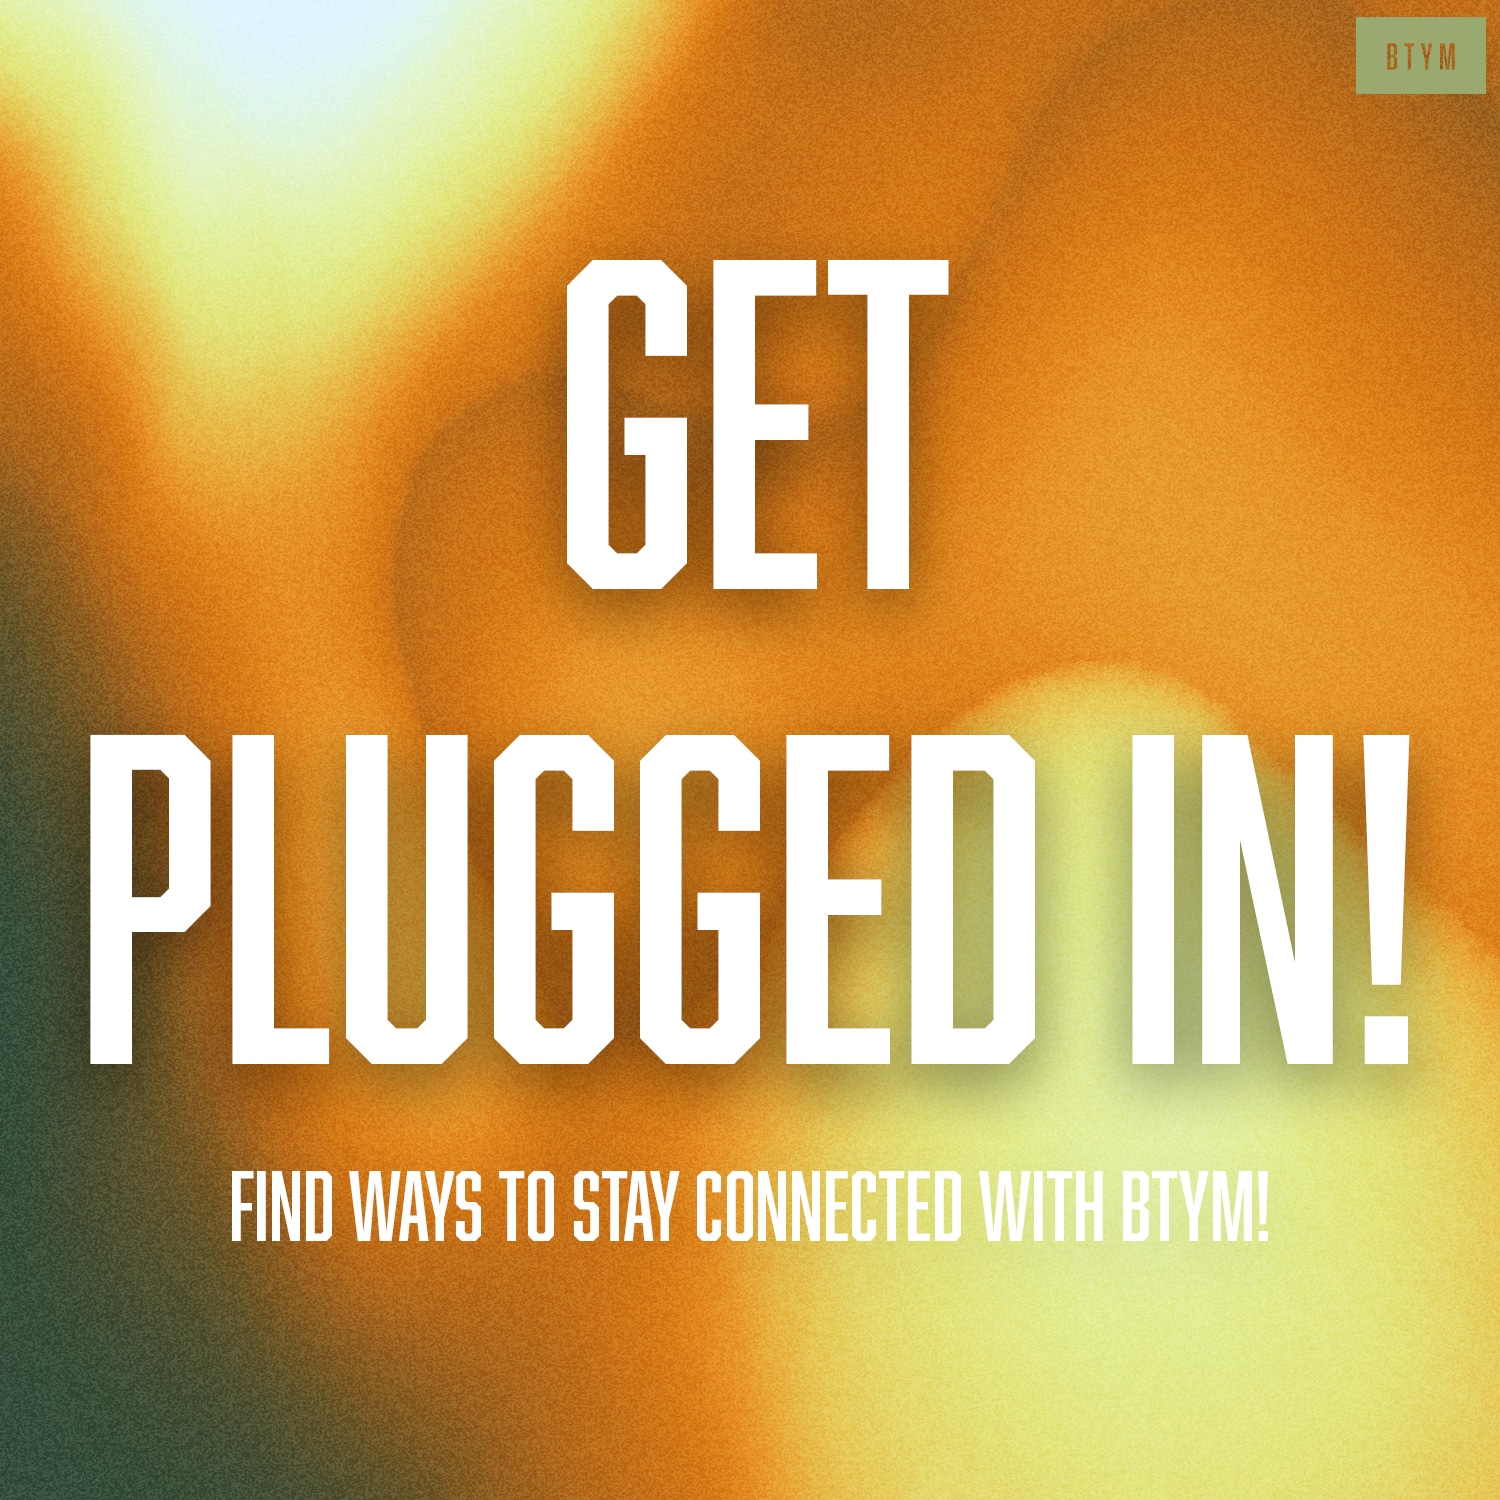 The Brooklyn Tabernacle Get Plugged In Thumbnail